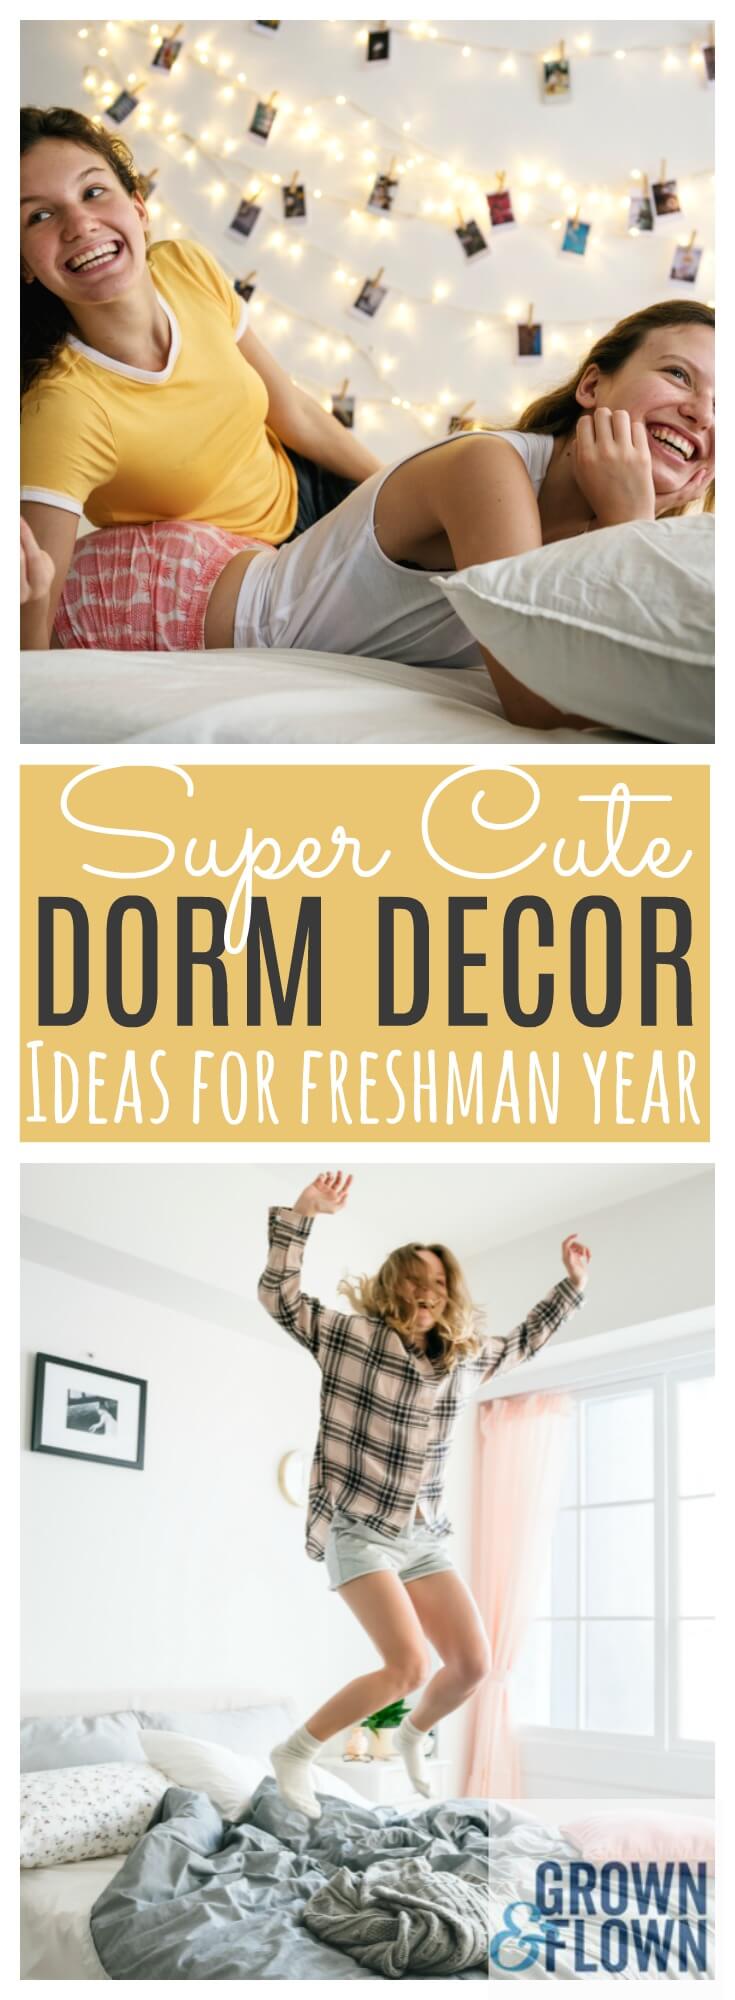 The cutest dorm room ideas are here.  Your freshman will love hanging out in his or her dorm room with these fun organization and decor ideas for her first college dorm.  #freshmanyear #college #collegedorm #dormideas #dormdecor #Diydorm #collegelife #dormroom #dormorganization #organizationideas